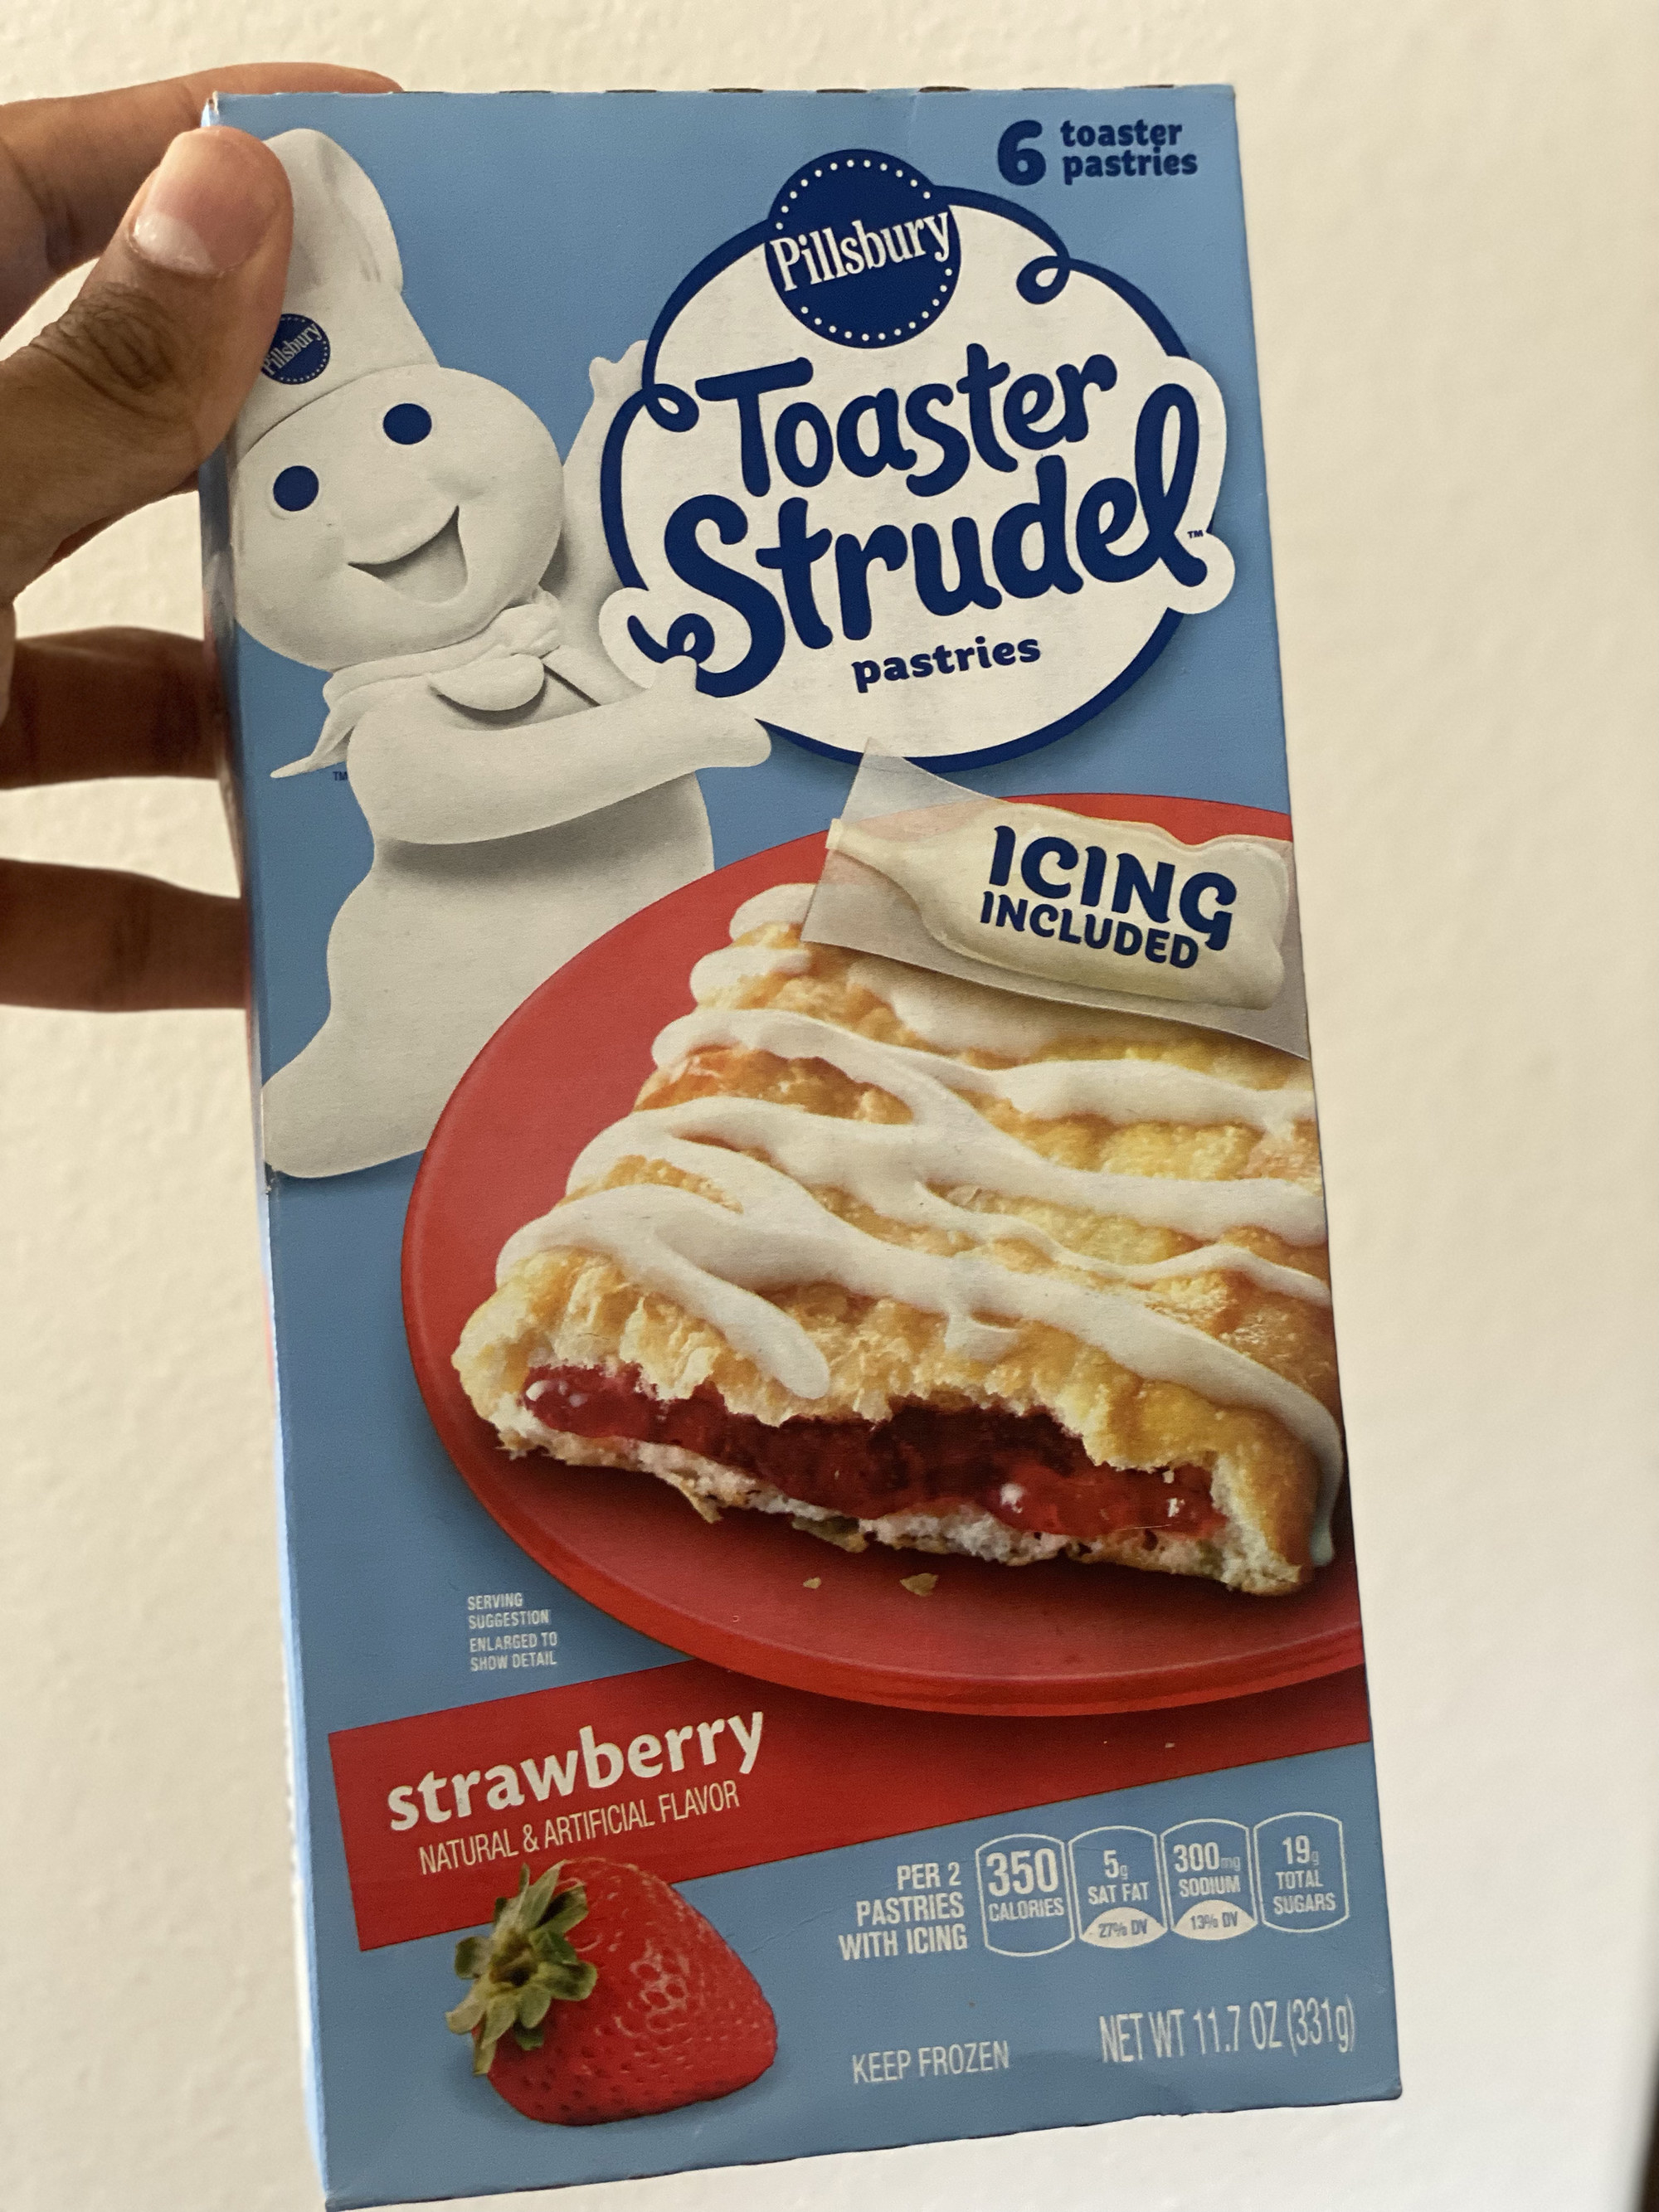 box showing a cartoon doughboy icing a strawberry toaster strudel